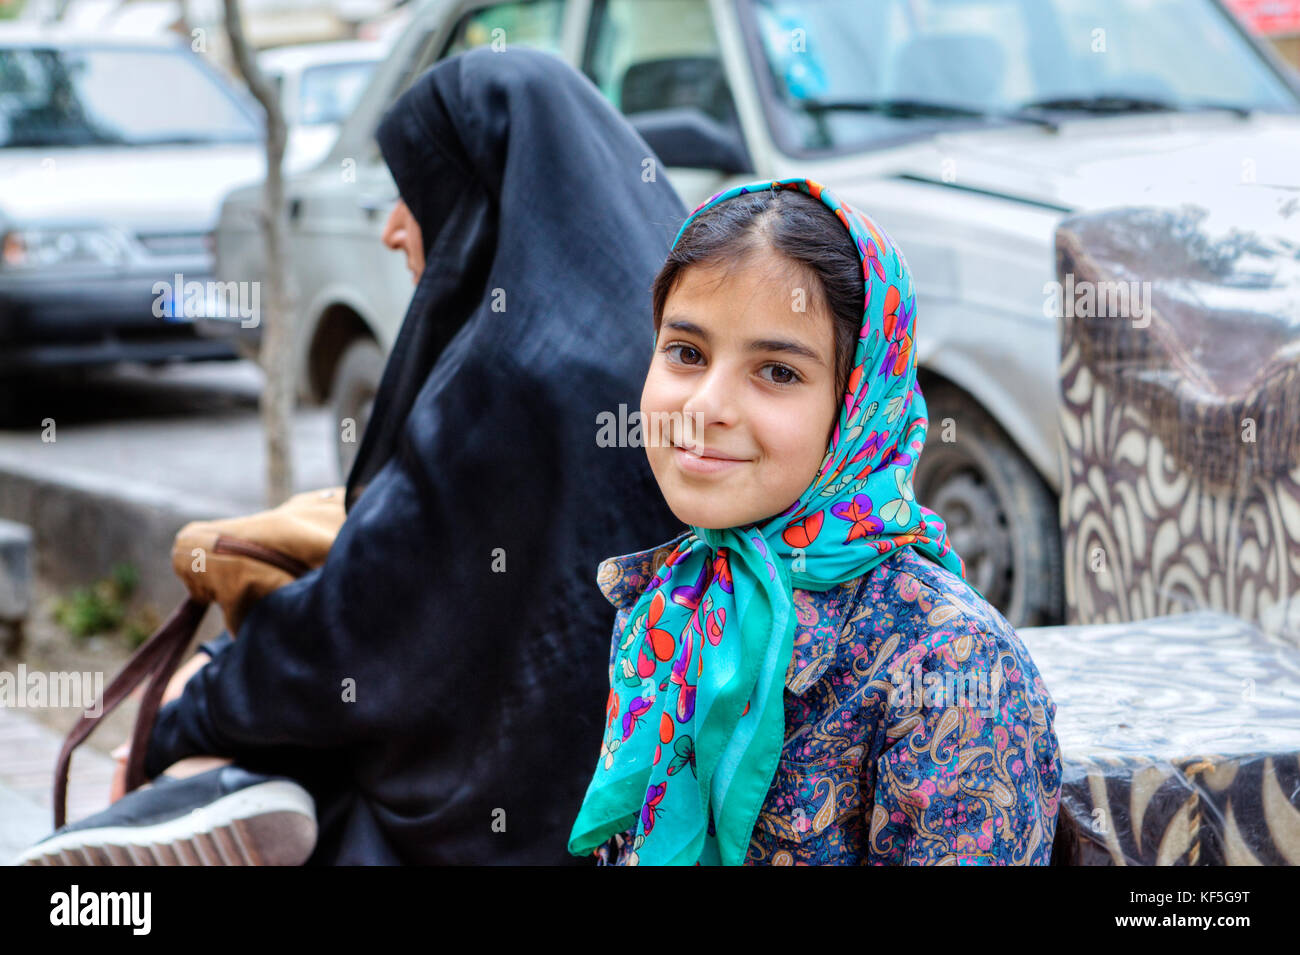 Shiraz, Iran - 19 april, 2017: Mature woman and a girl about 8 years old sat down to rest on a city street. Stock Photo